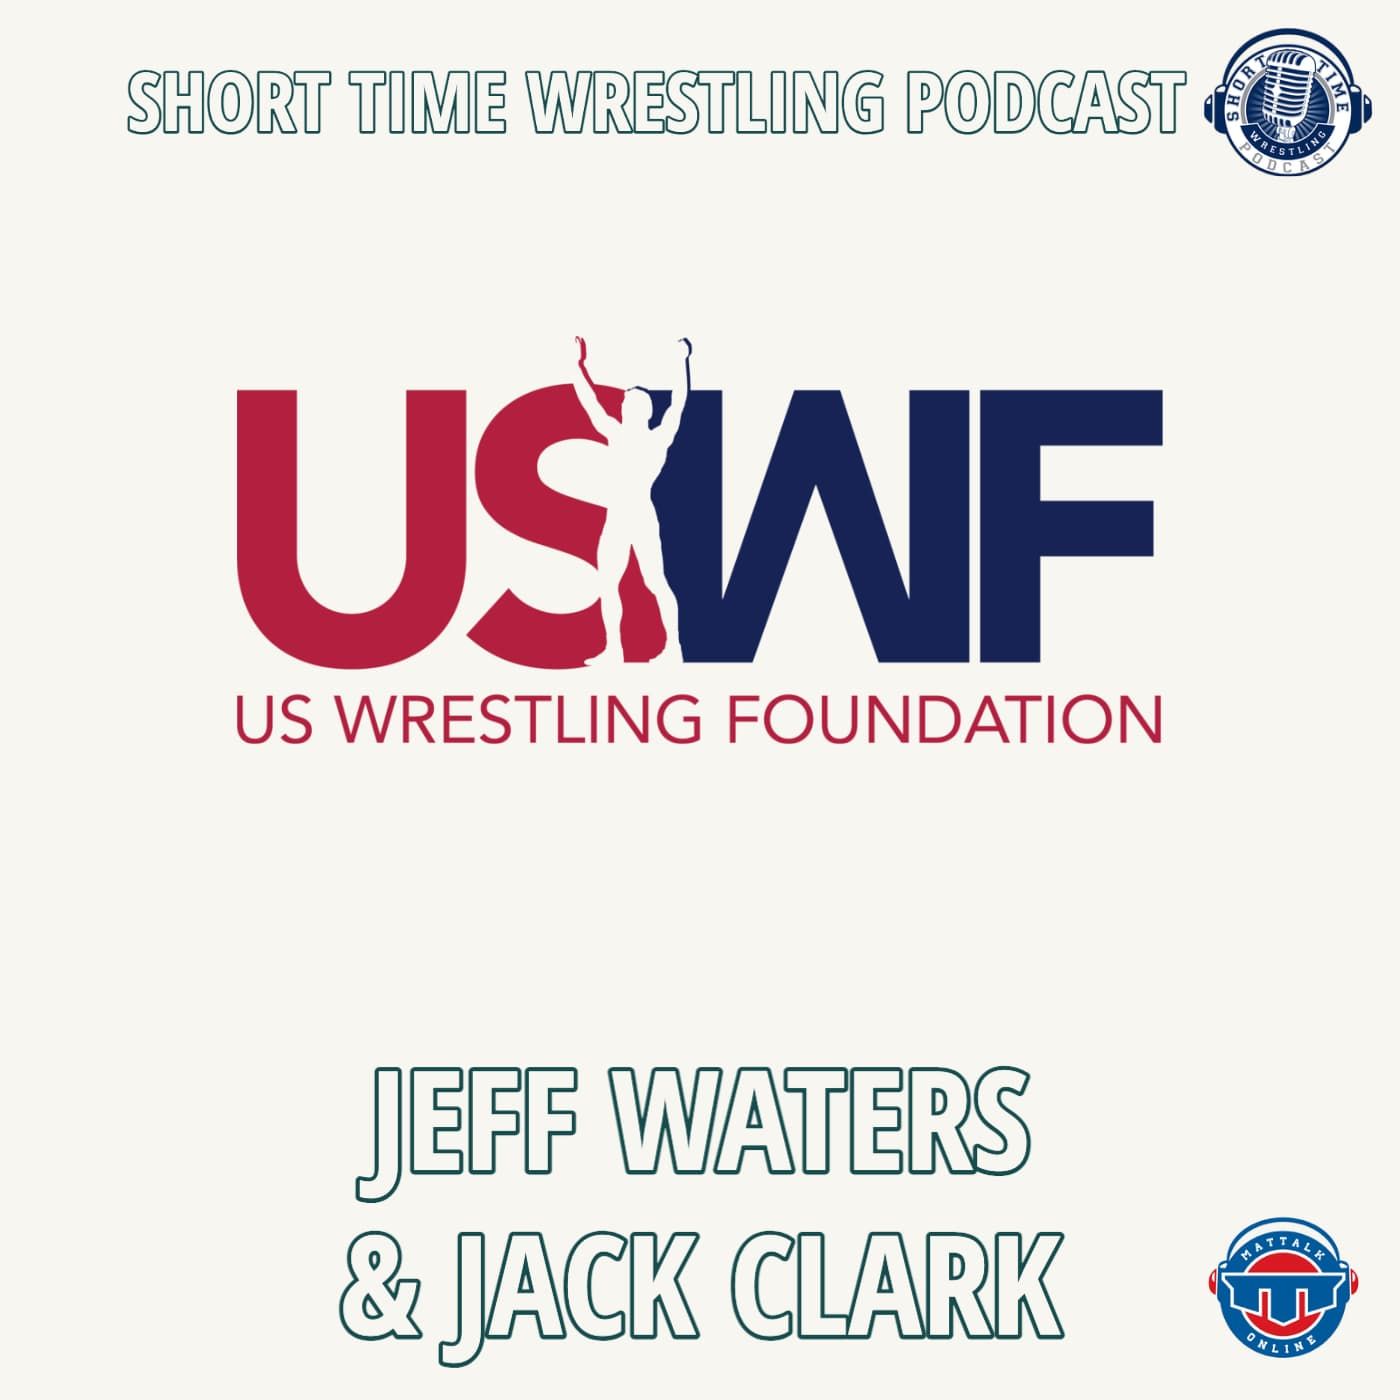 Jack Clark and Jeff Waters of the U.S. Wrestling Foundation talk #LetsWrestle, Final X and more